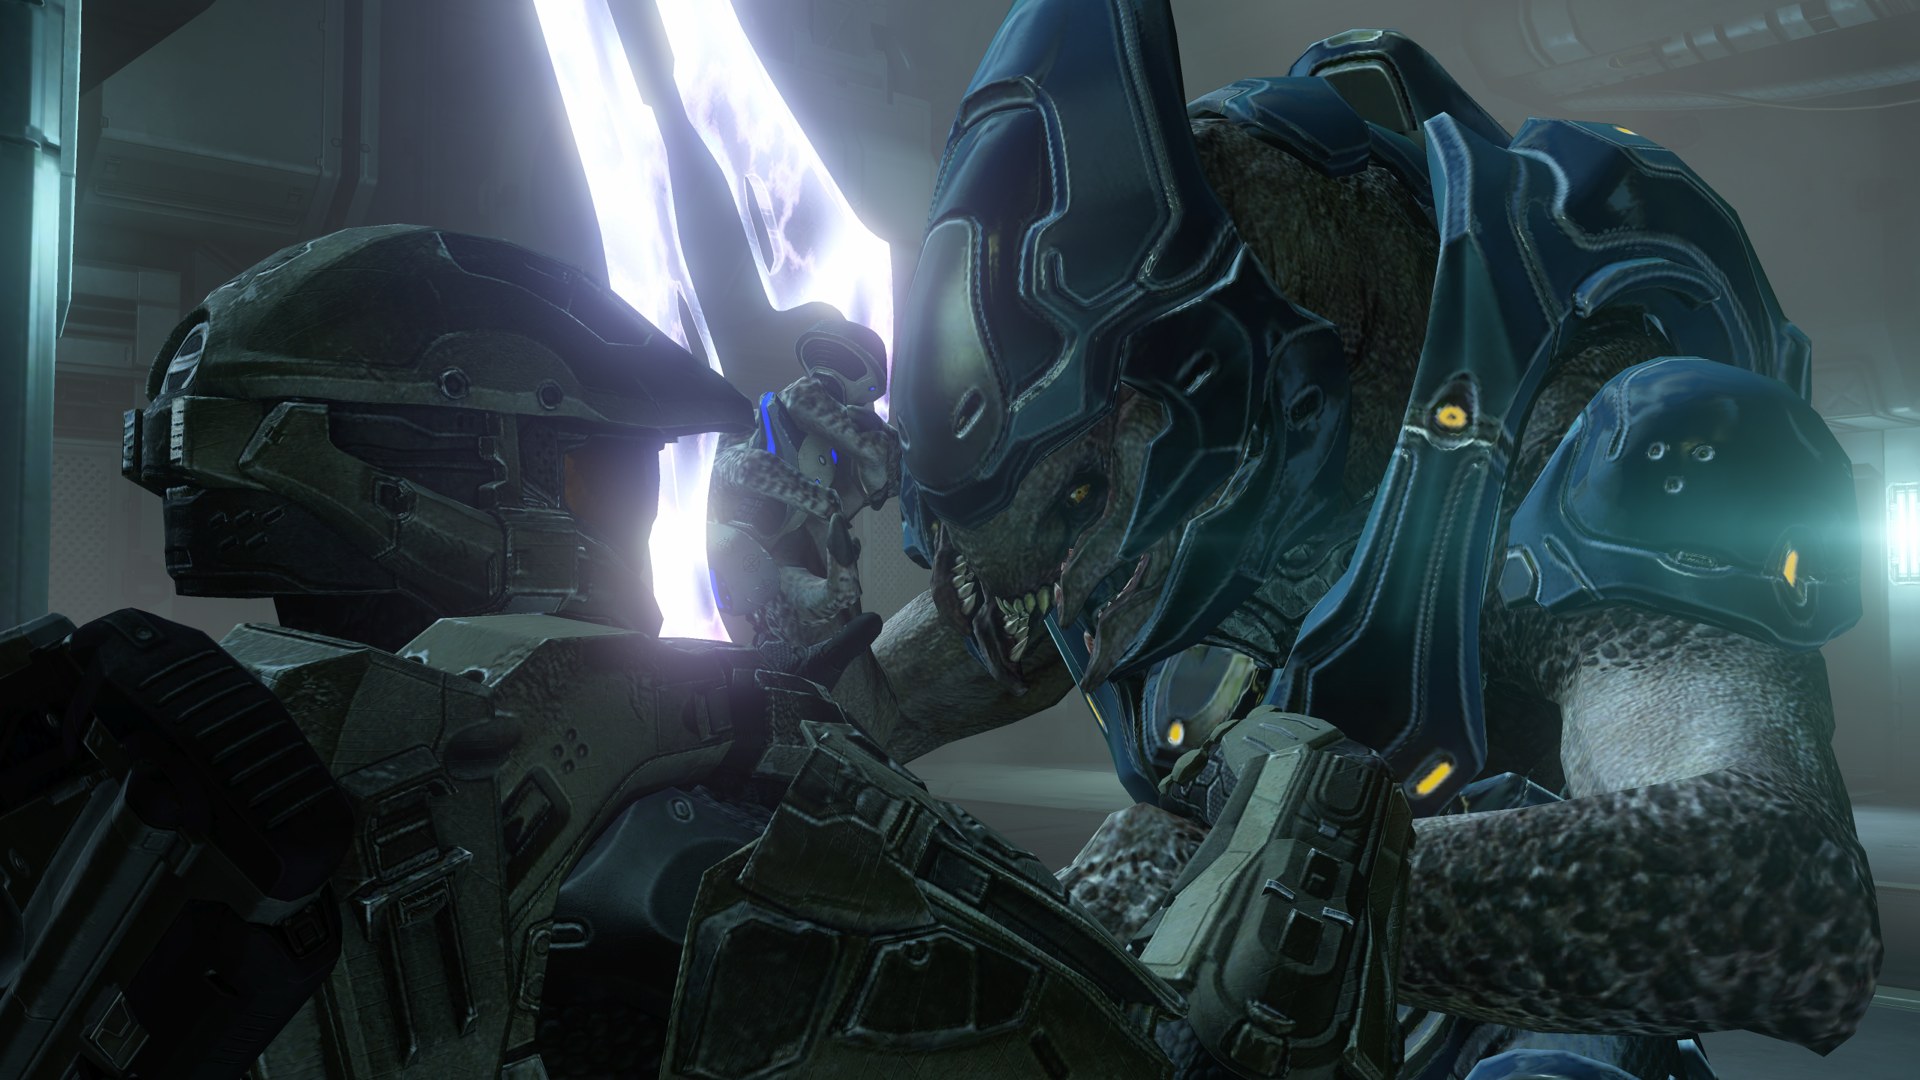 Video Game Halo 4 HD Wallpaper | Background Image